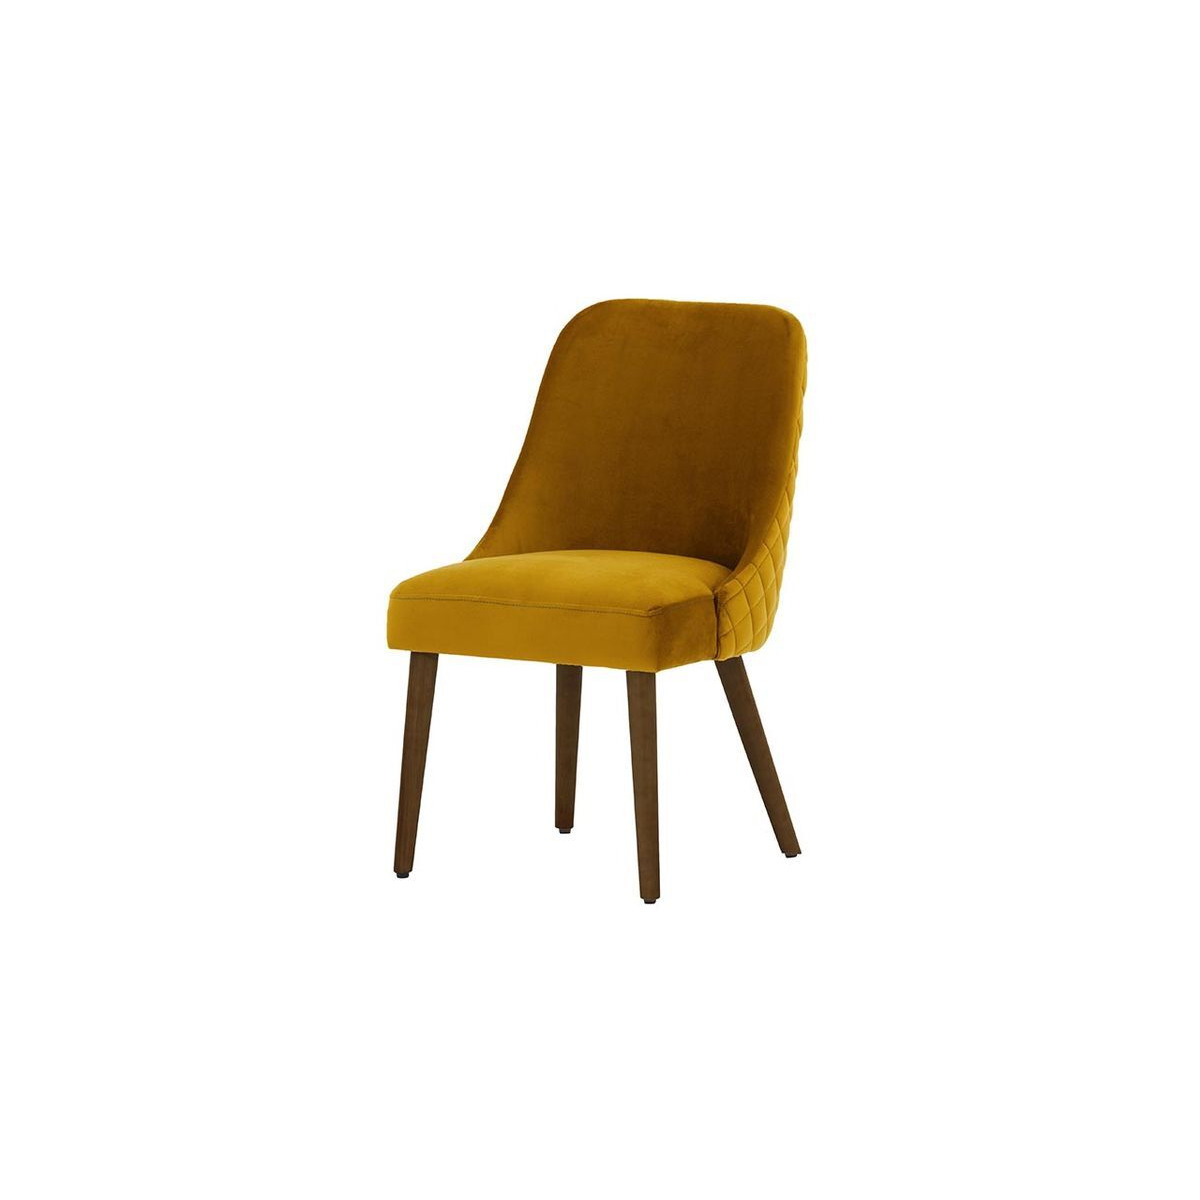 Albion Dining Chair with Stitching, mustard, Leg colour: dark oak - image 1